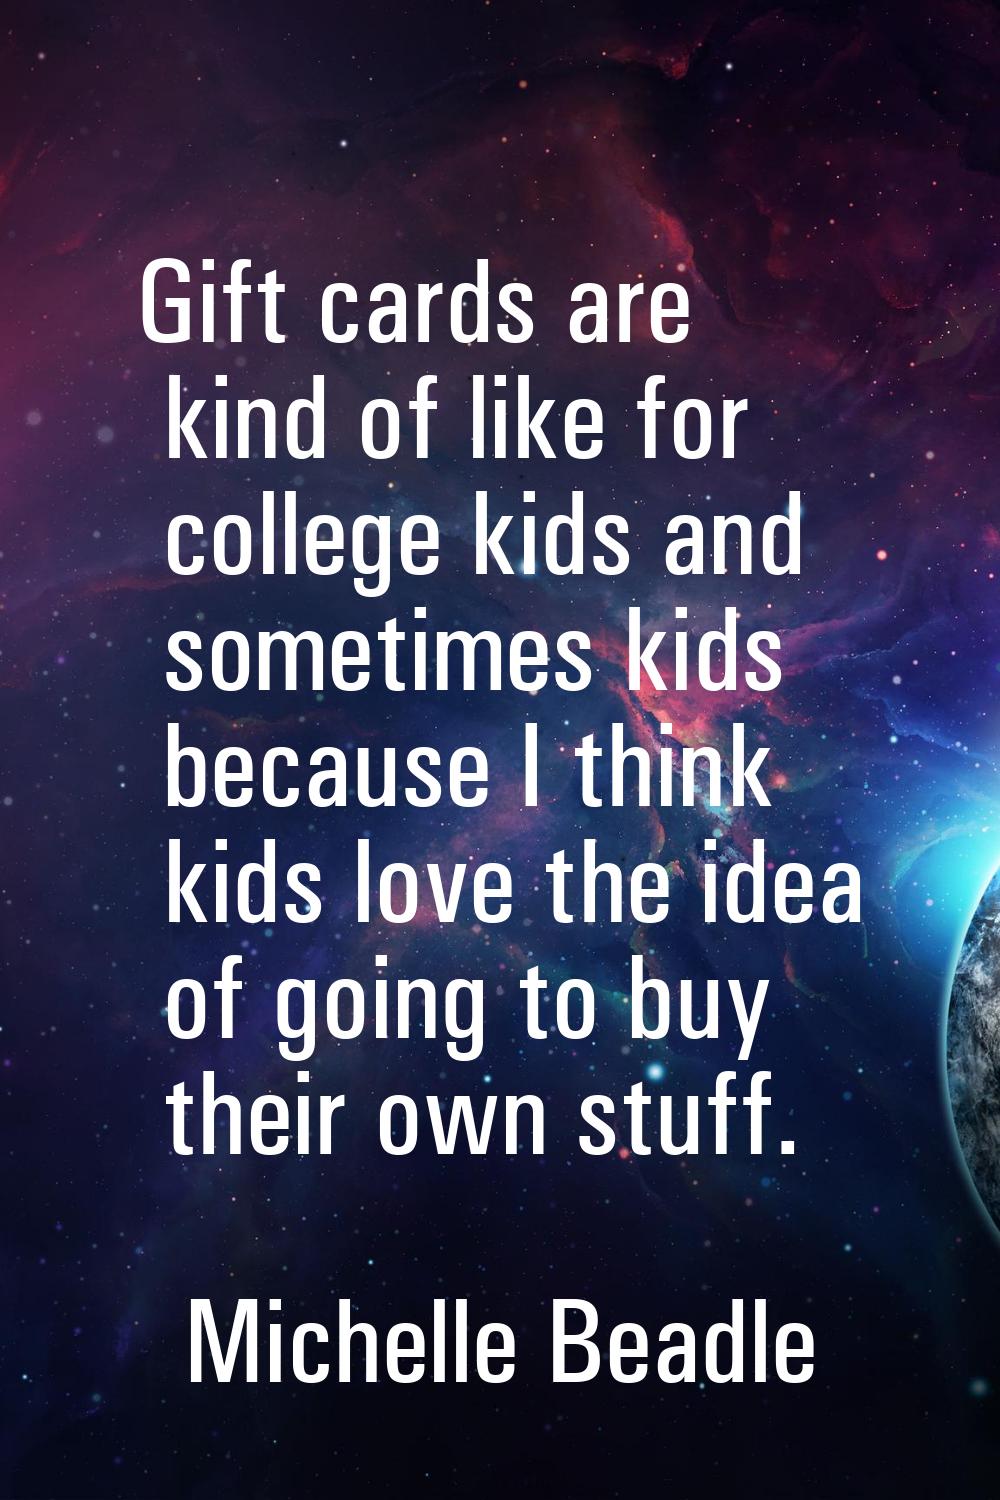 Gift cards are kind of like for college kids and sometimes kids because I think kids love the idea 